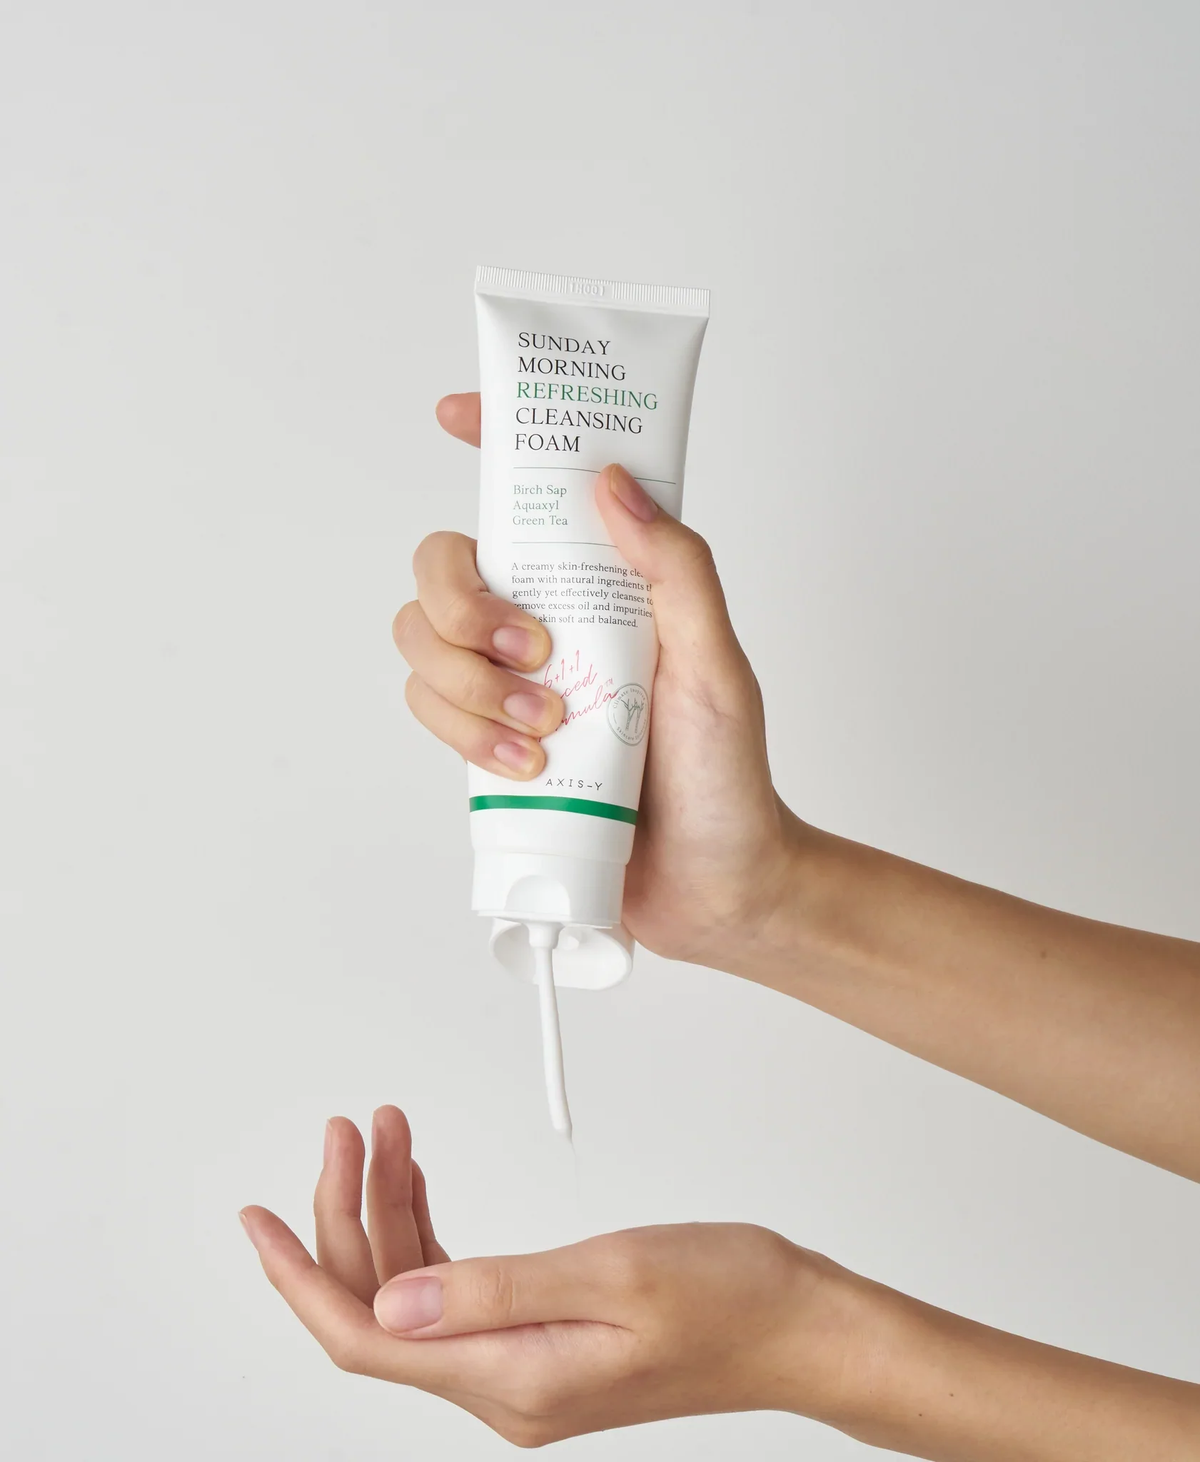 AXIS - Y - Sunday Morning Refreshing Cleansing Foam